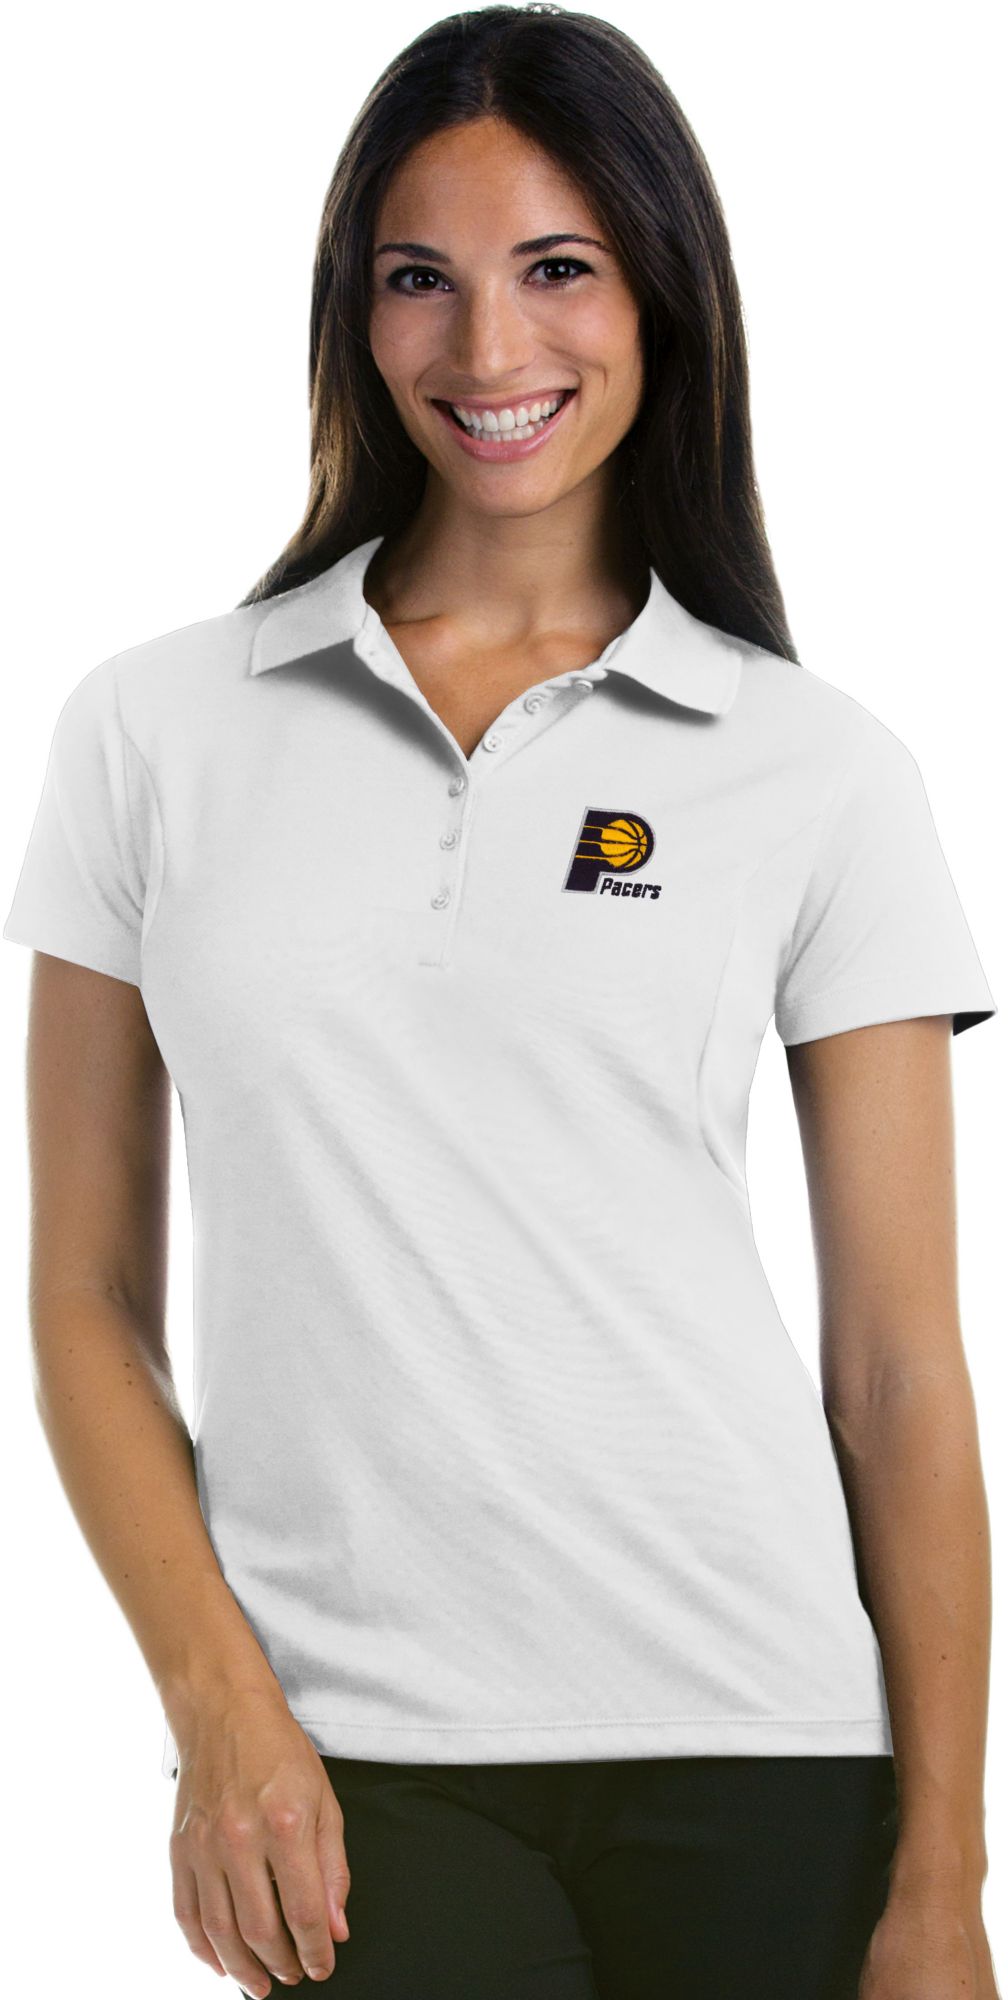 Indiana Pacers Women's Apparel 